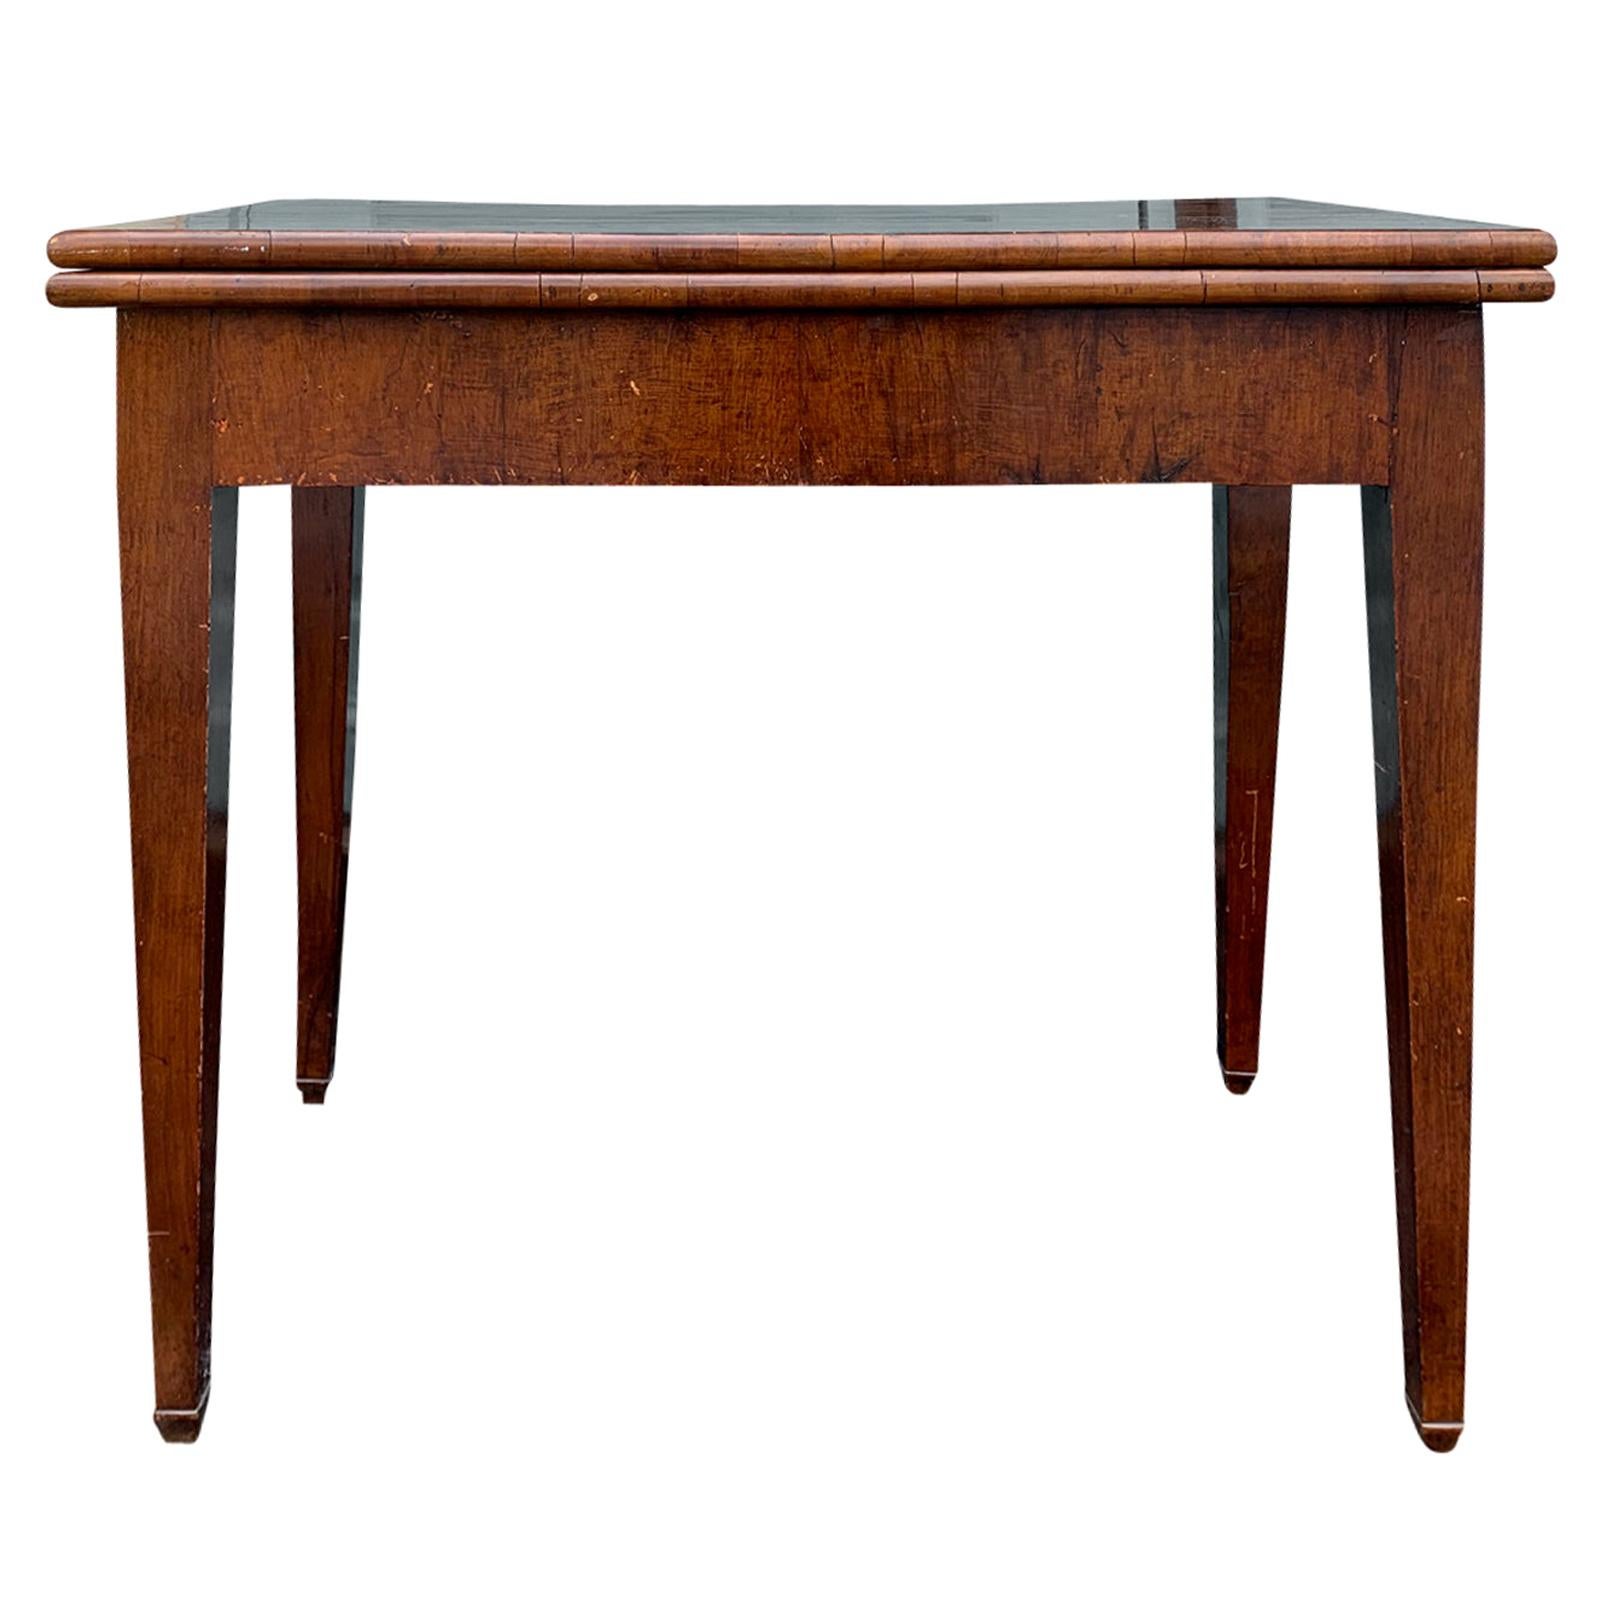 19th Century Chippendale Style Mahogany Flip Top Card Table with Leather Top